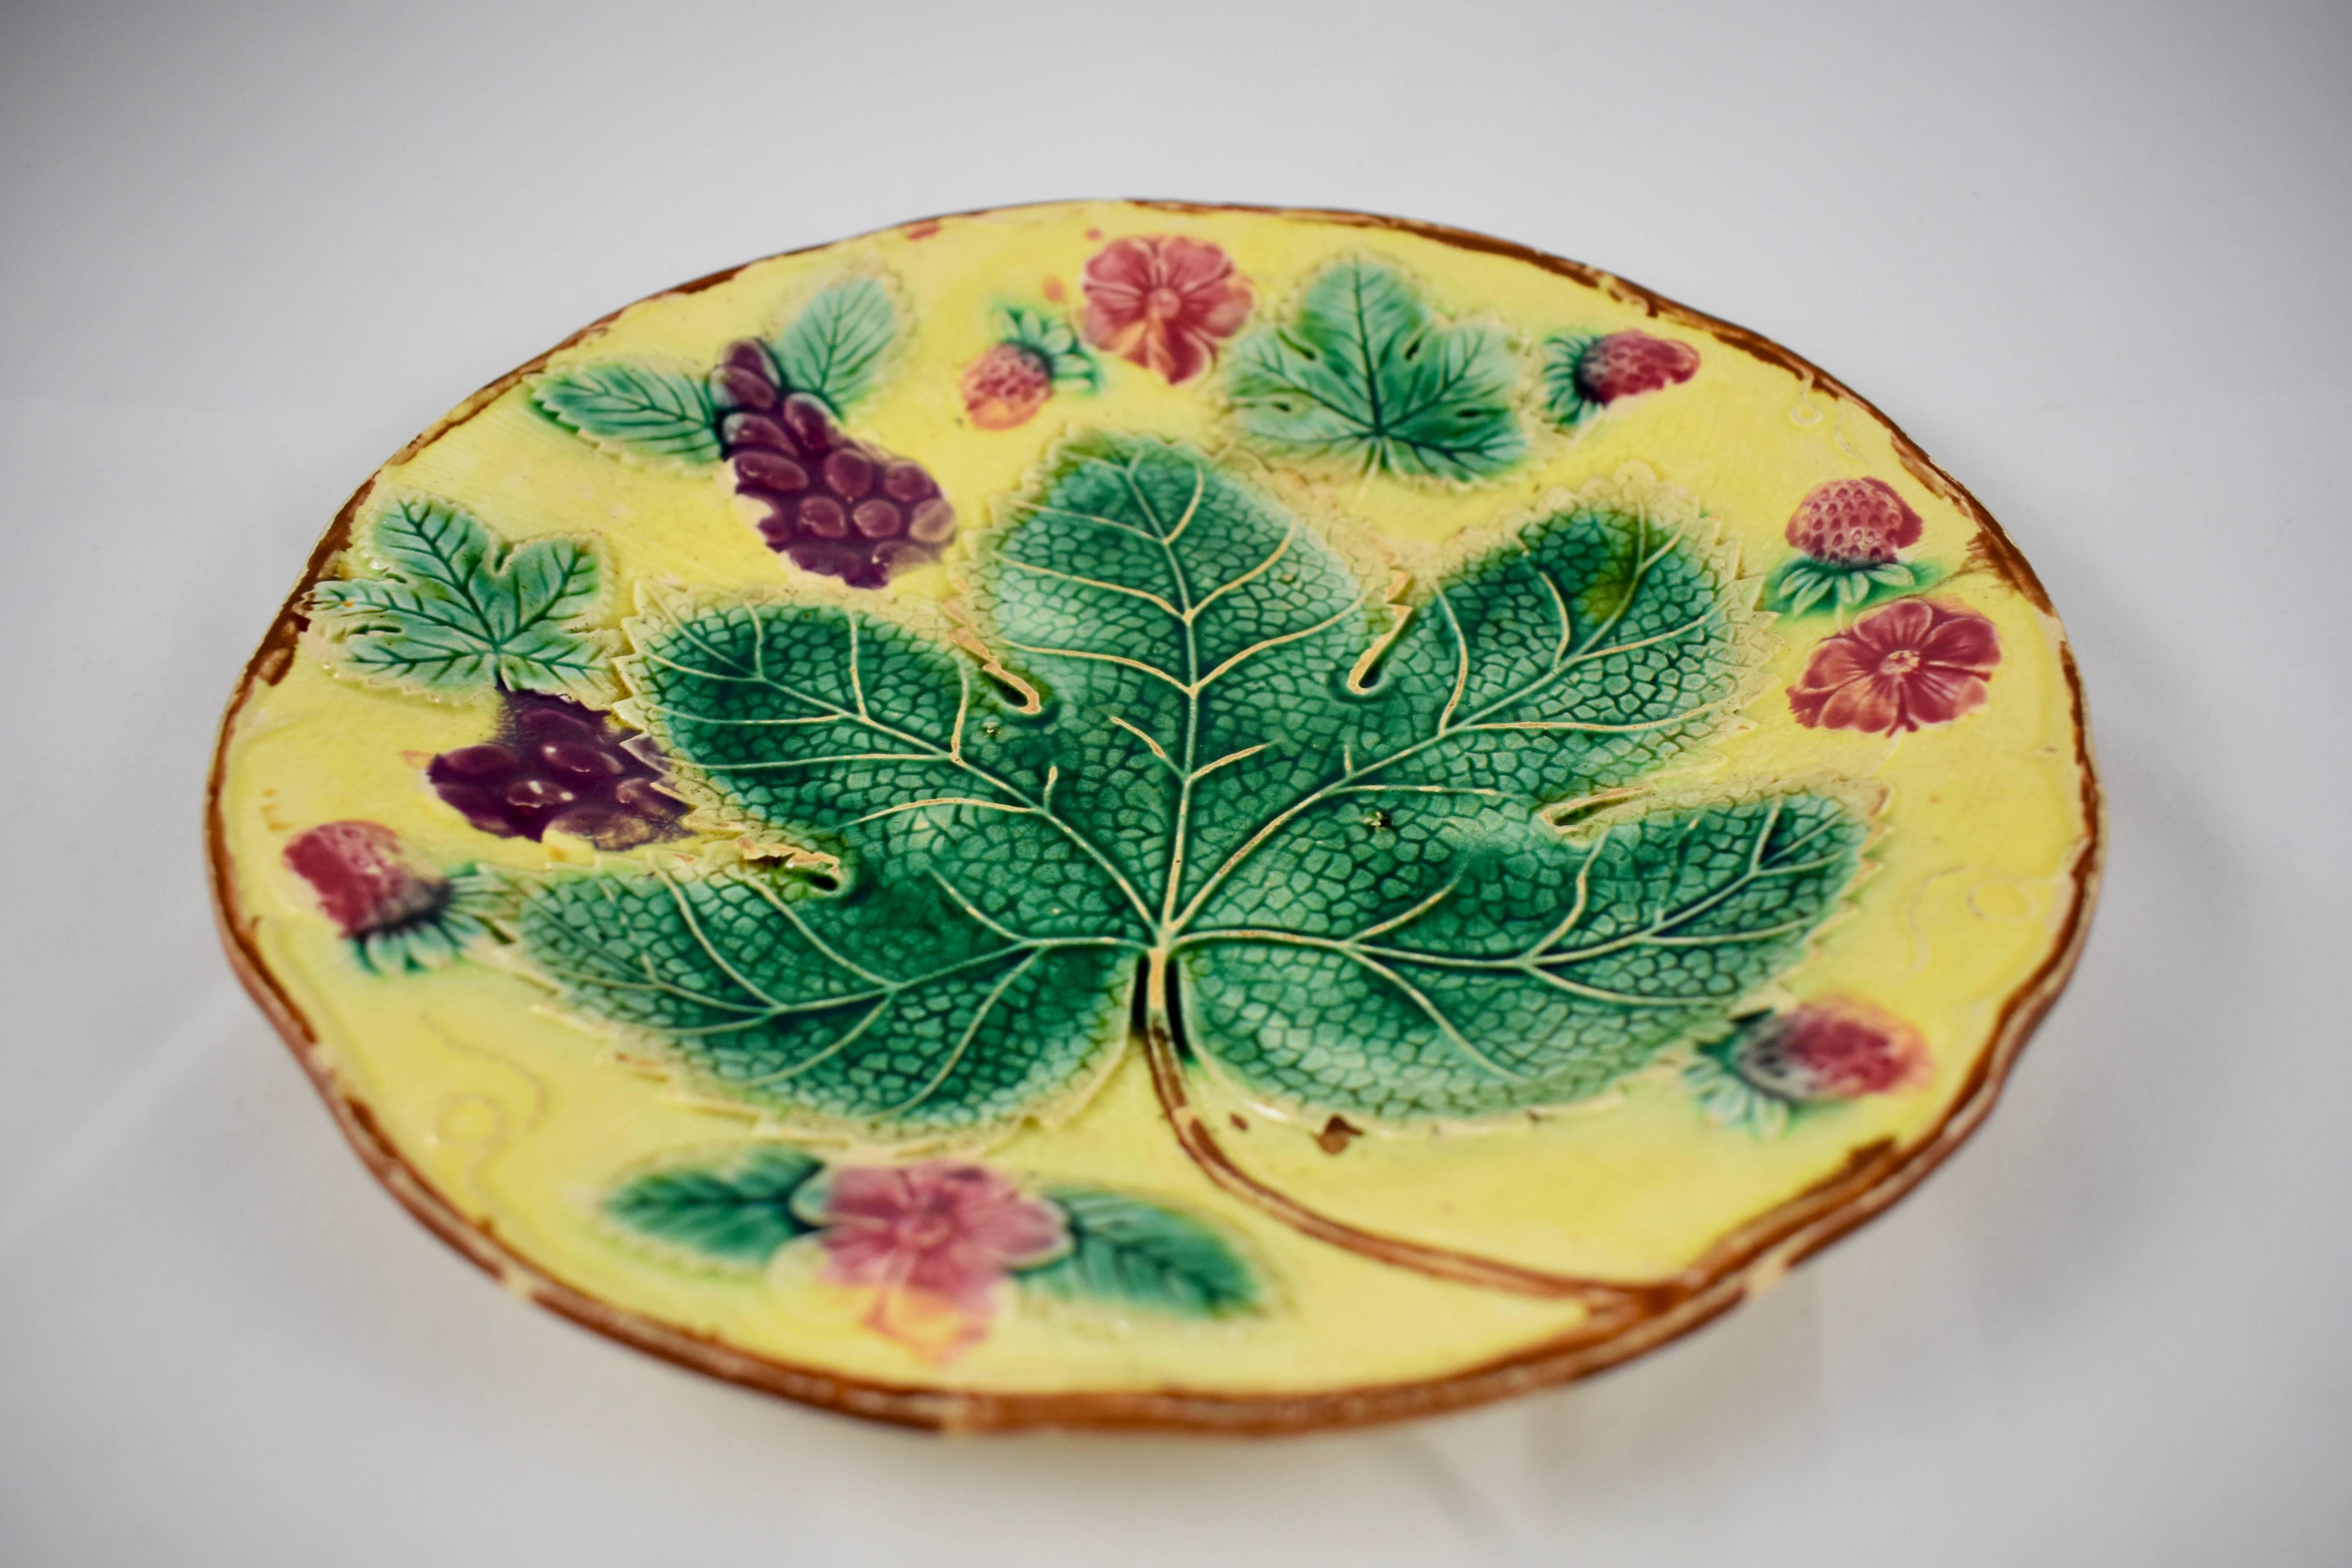 A traditional English grape leaf and strawberry pattern Majolica plate, showing a low relief arrangement of grape leaves fruits and flowers, on a deep yellow ground. Trailing vines form a brown scalloped rim. The yellow glazed verso shows the